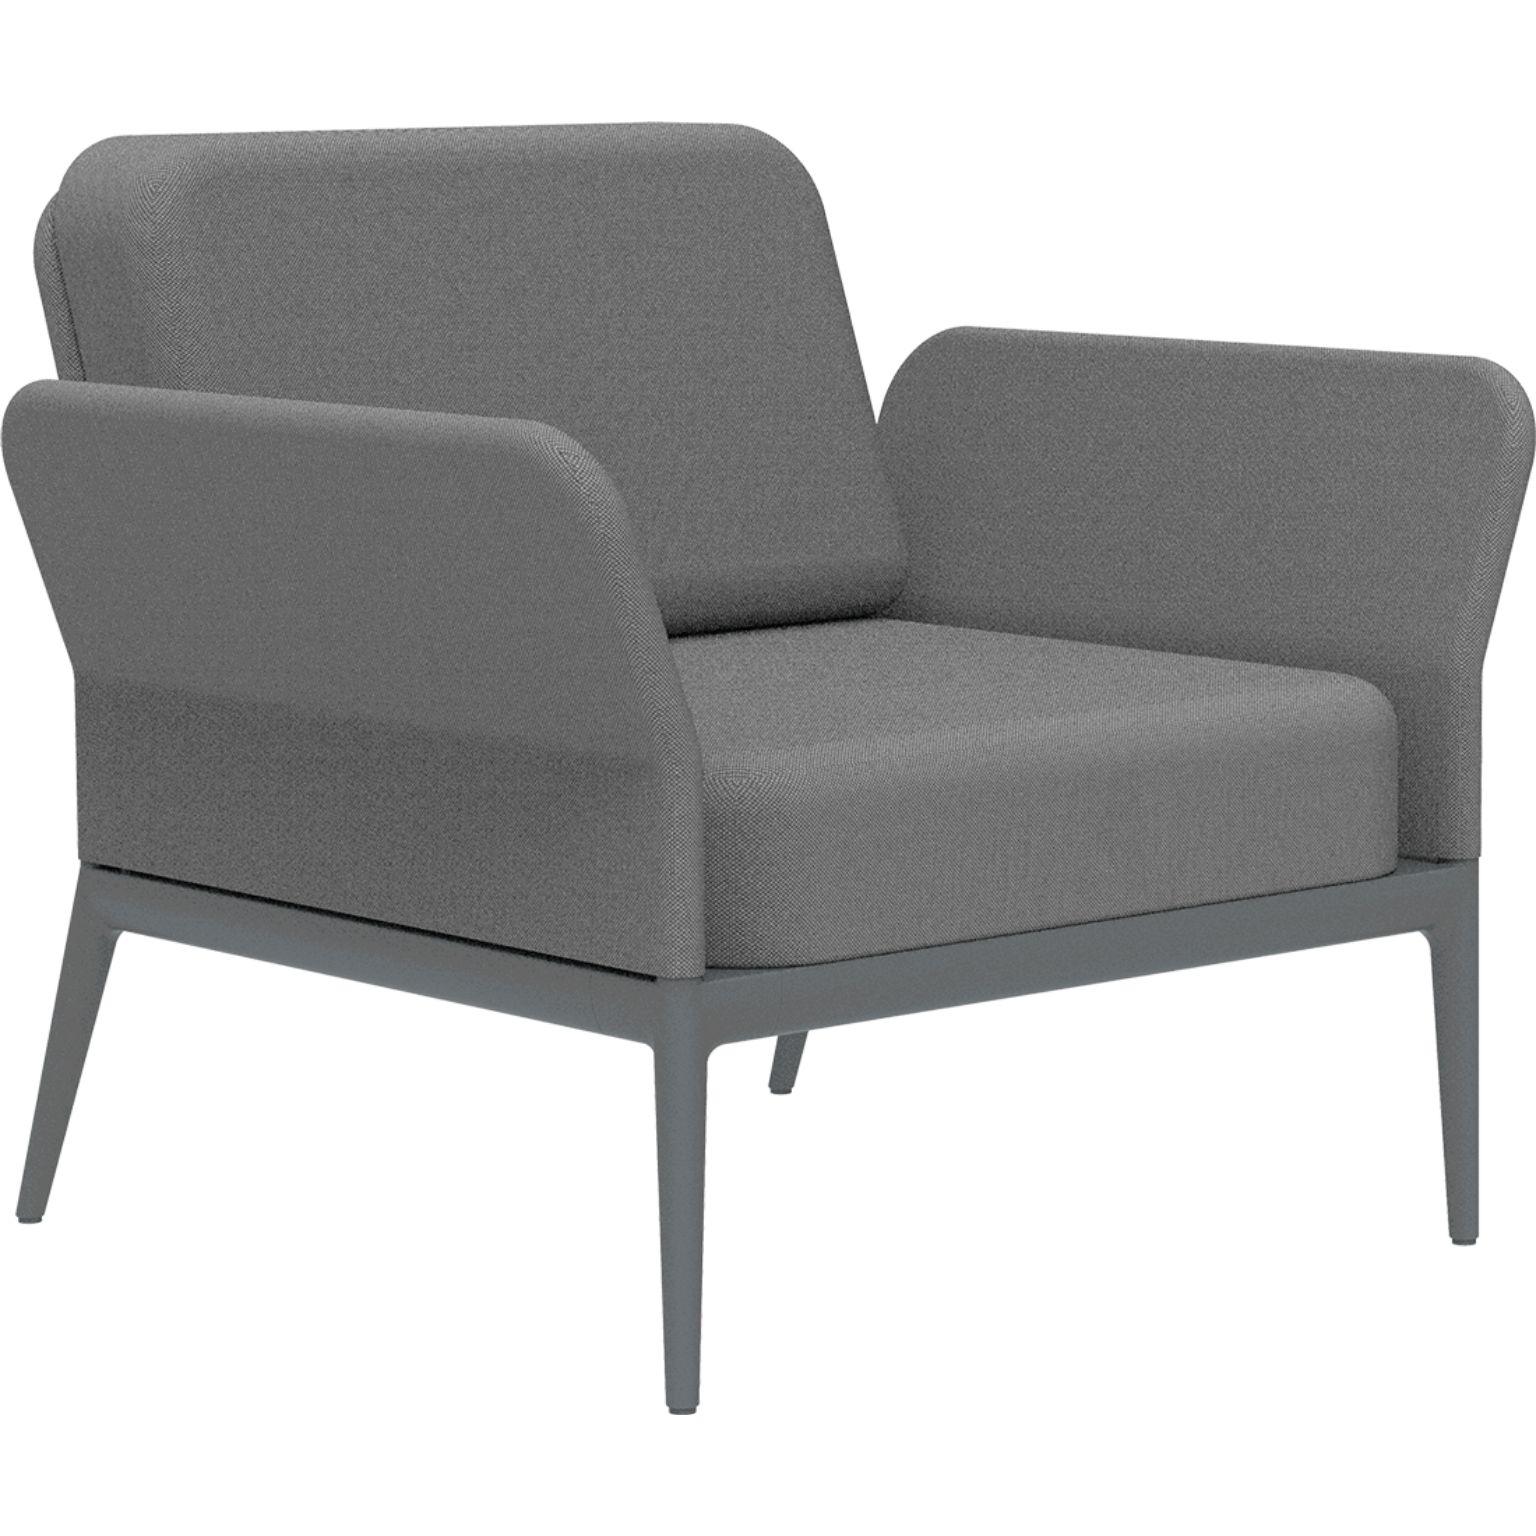 Cover Grey longue chair by MOWEE
Dimensions: D83 x W91 x H81 cm (seat height 42 cm).
Material: Aluminum and upholstery.
Weight: 20 kg.
Also available in different colors and finishes. 

An unmistakable collection for its beauty and robustness.